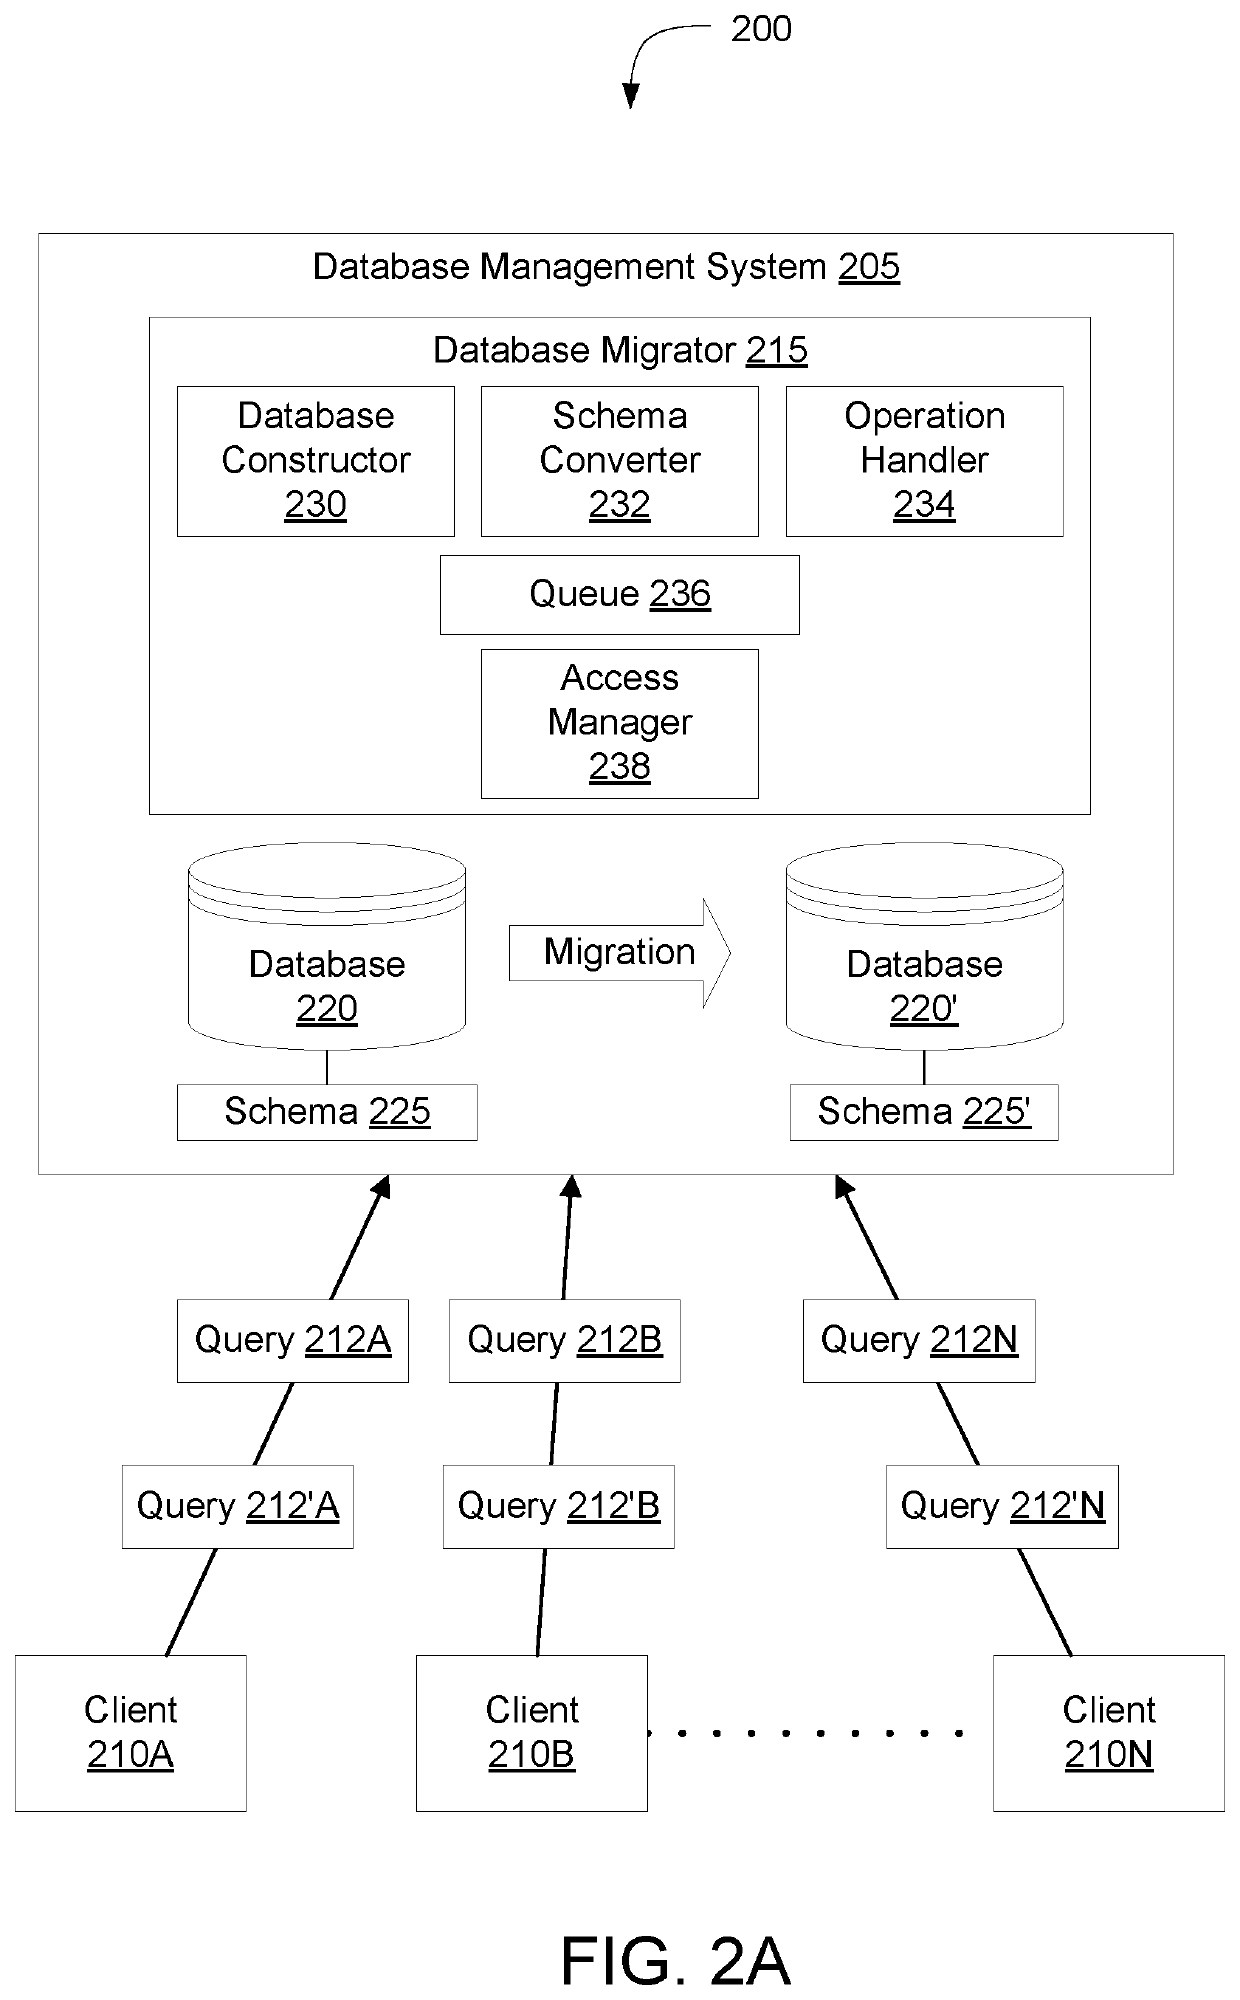 Live zero downtime migration of databases with disparate schemata